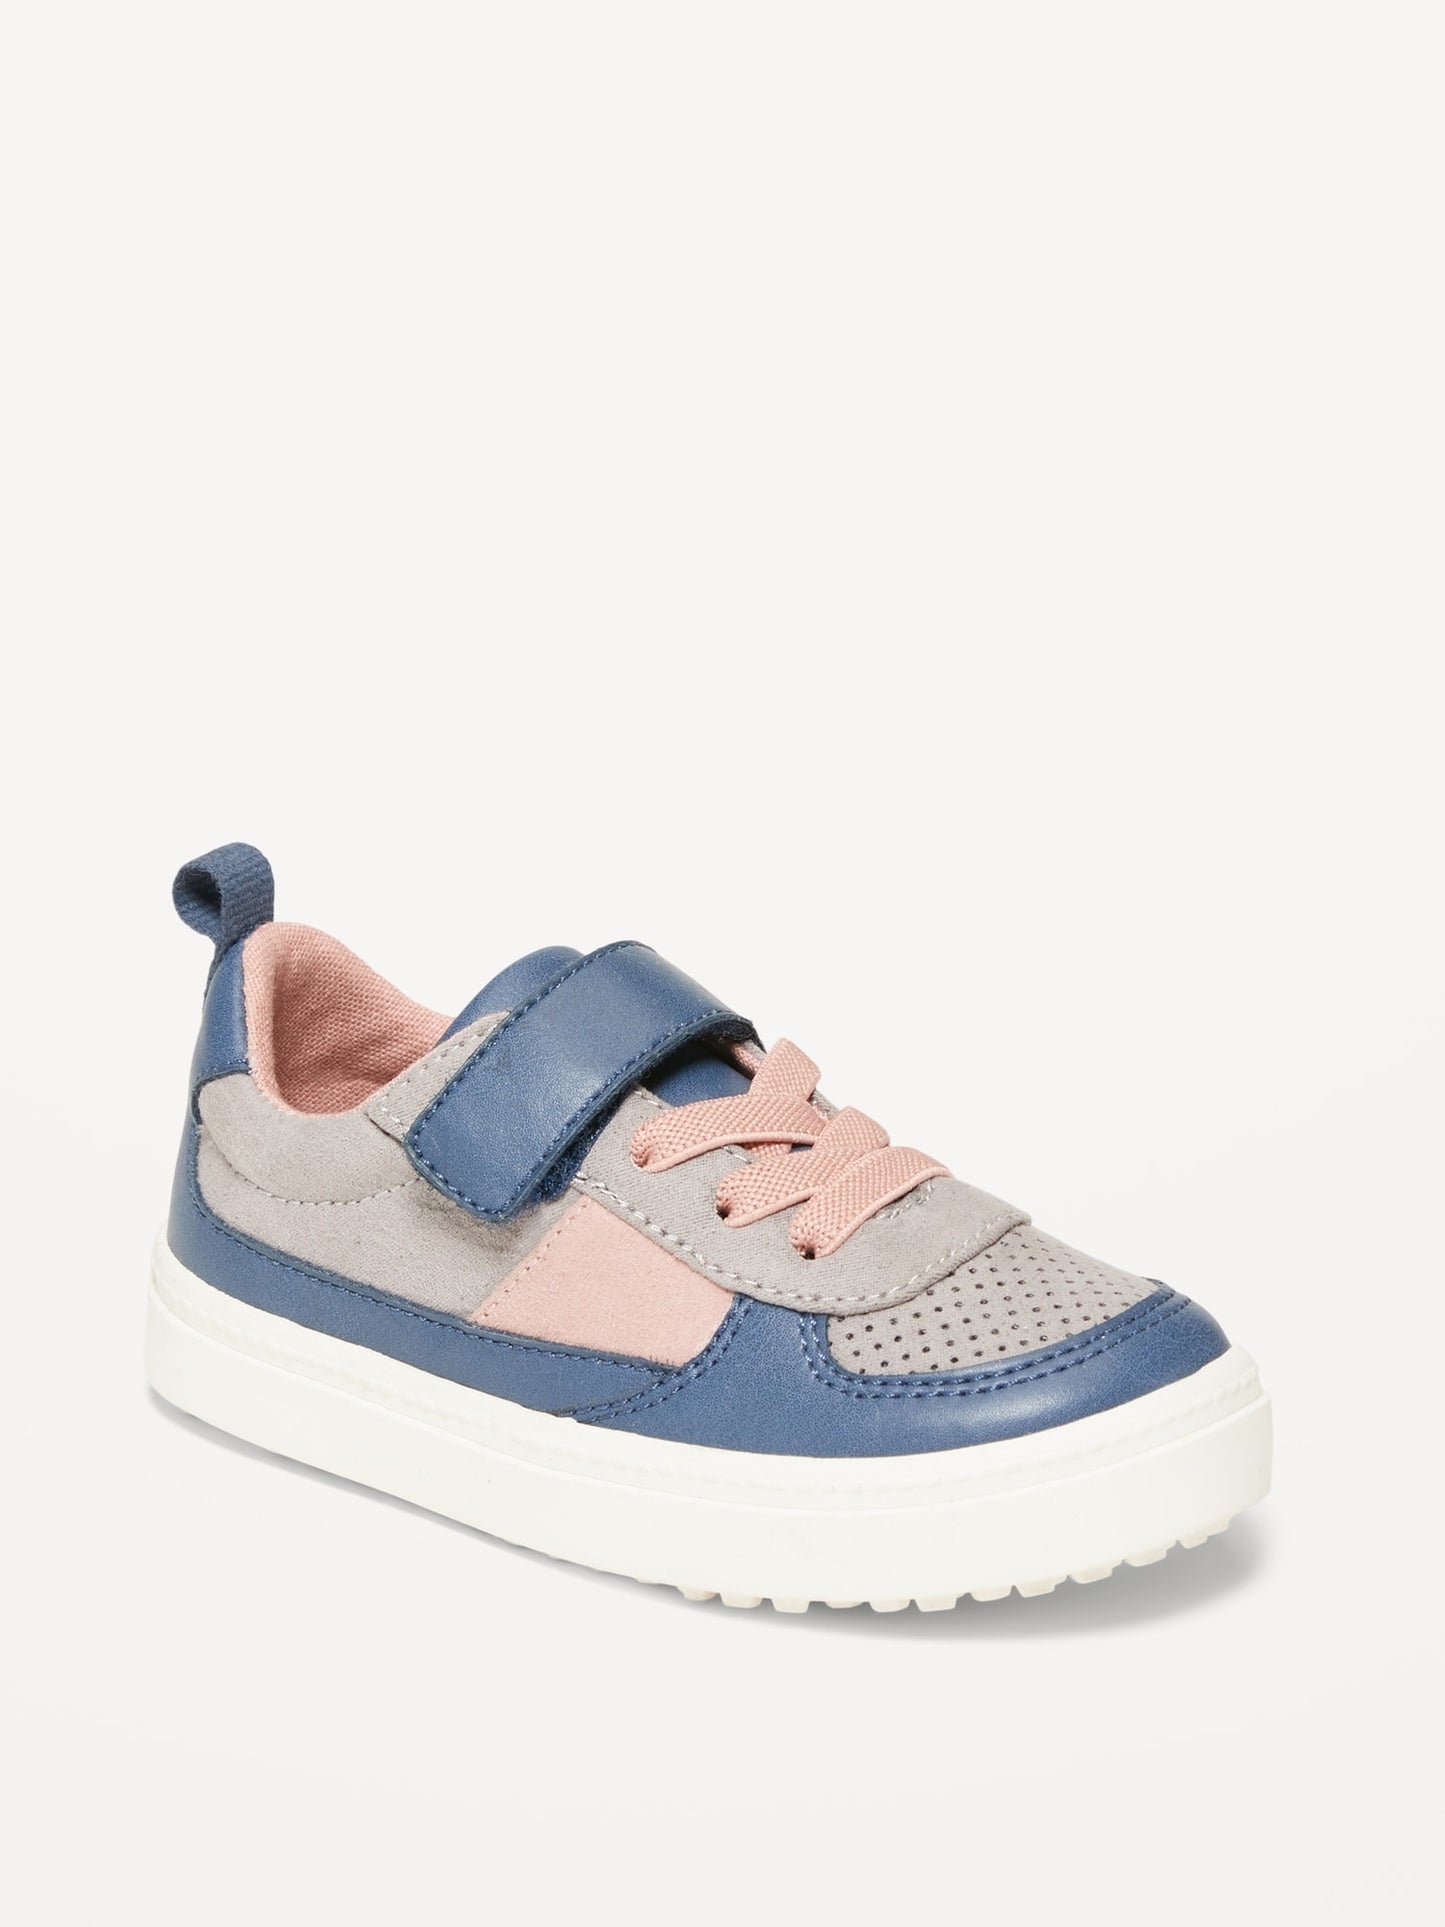 Unisex Low-Top Sneakers for Toddler